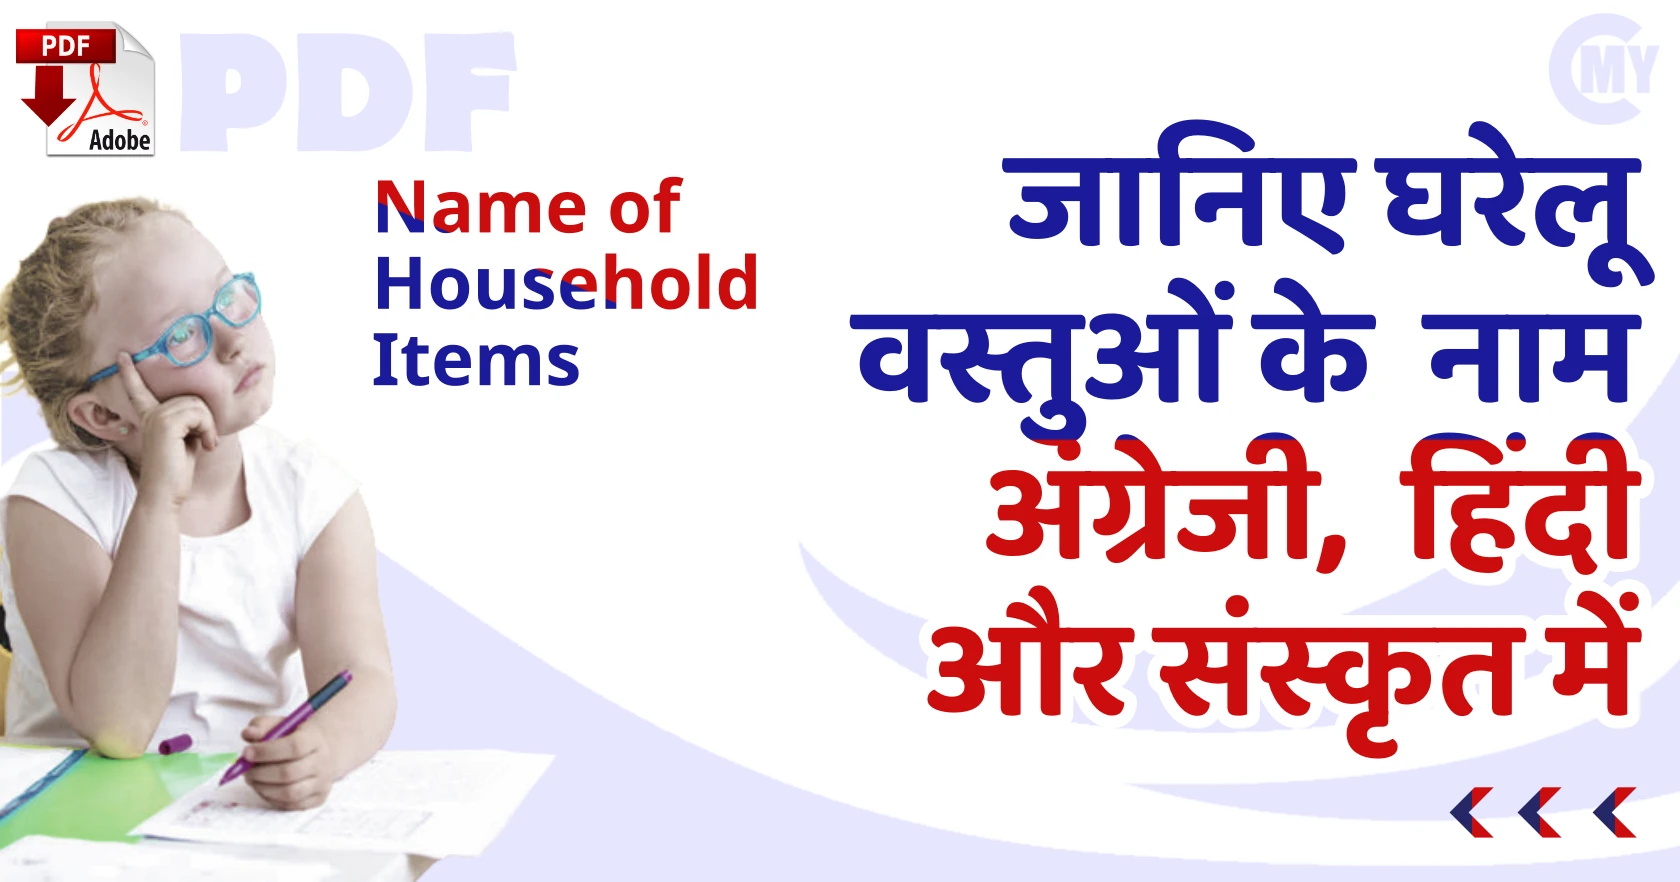 Household Items in English and Hindi